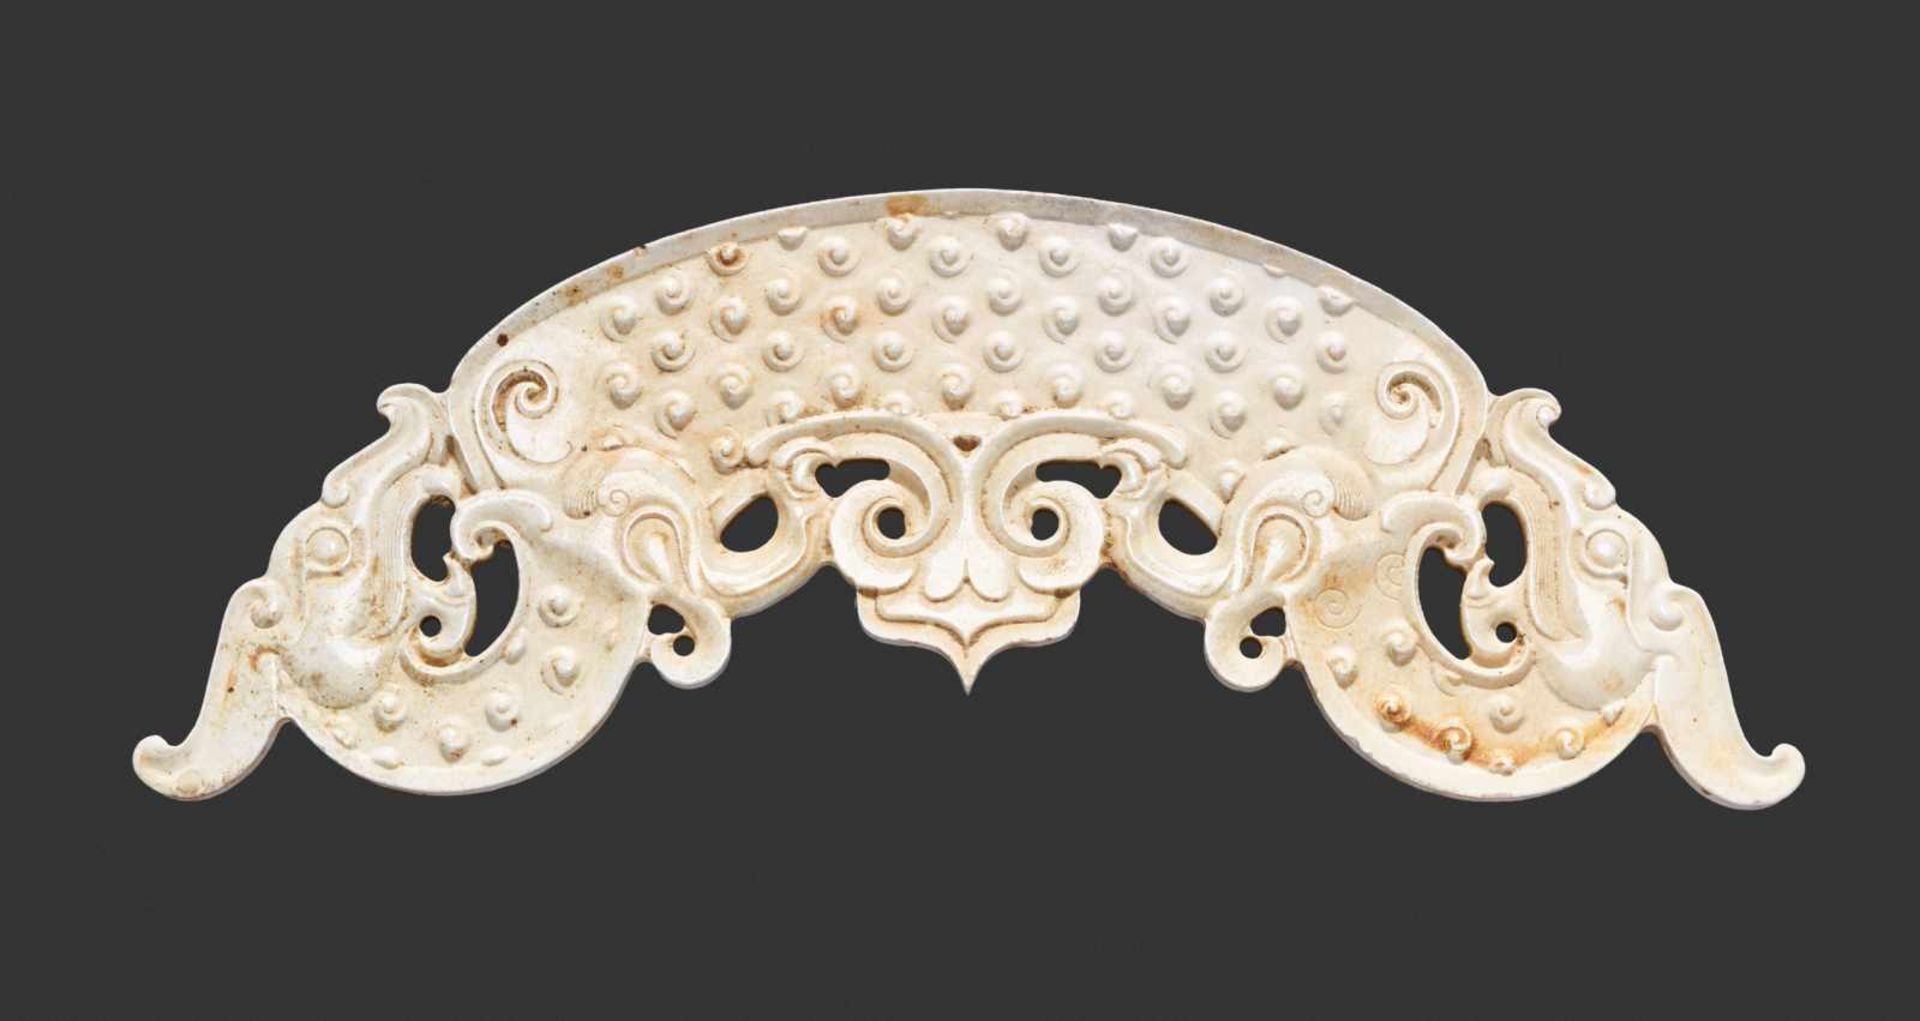 A REMARKABLE HUANG WITH FINELY DETAILED SINUOUS DRAGONS IN IVORY-LIKE JADE Jade. China, Eastern